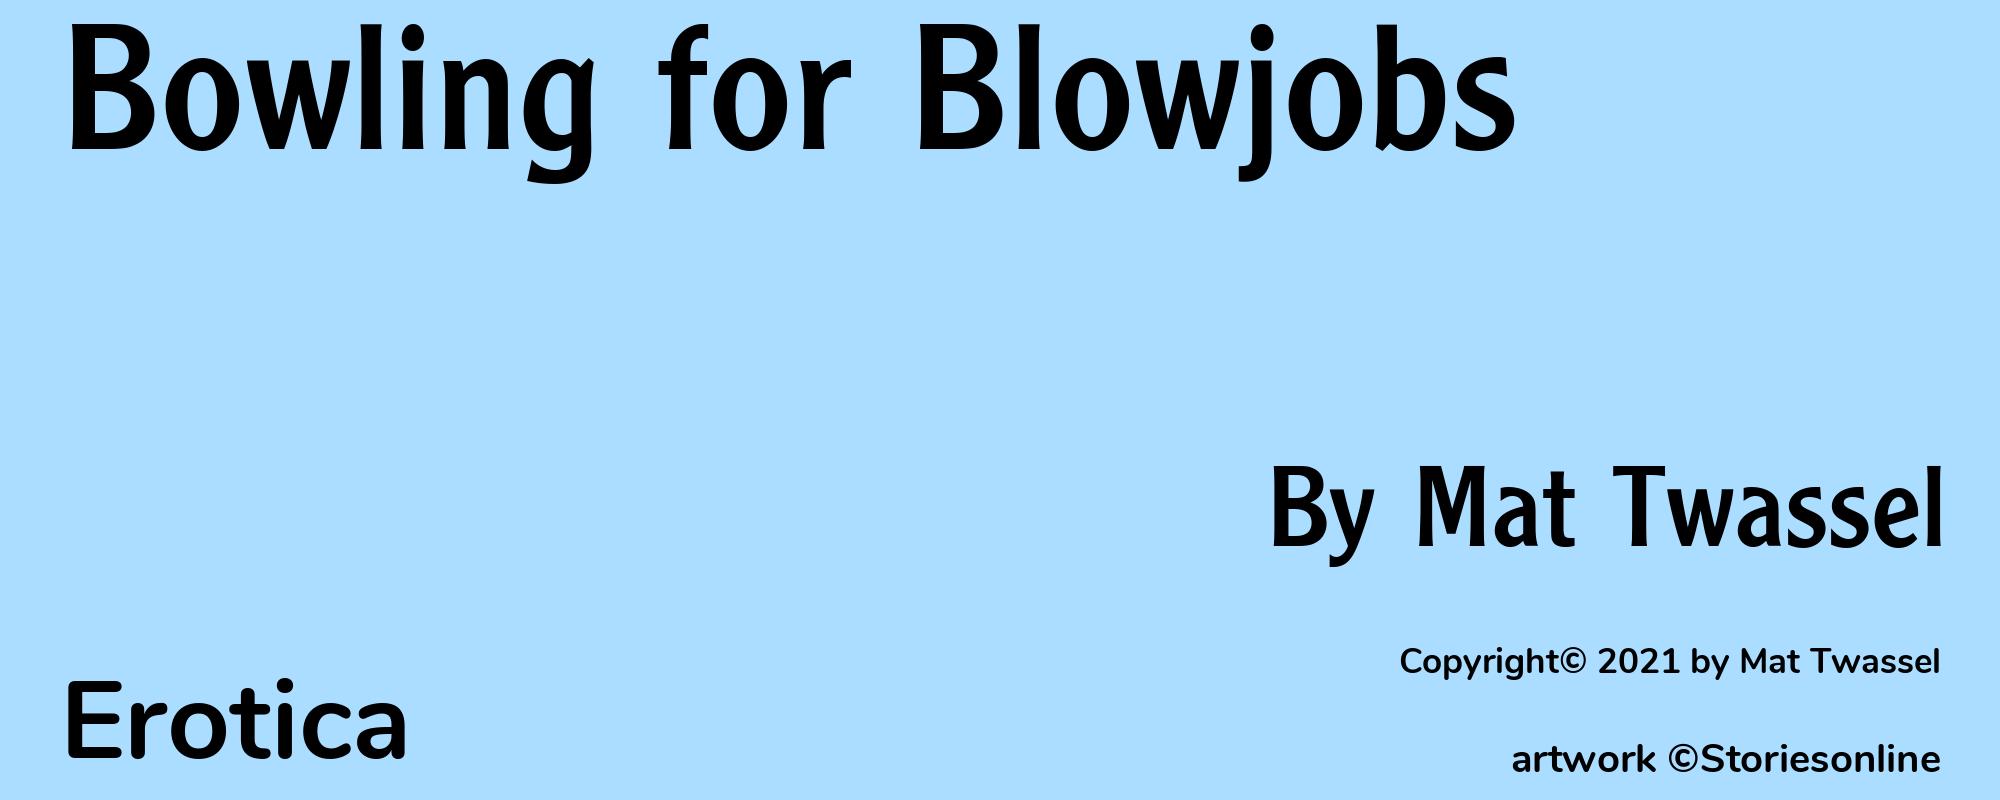 Bowling for Blowjobs - Cover